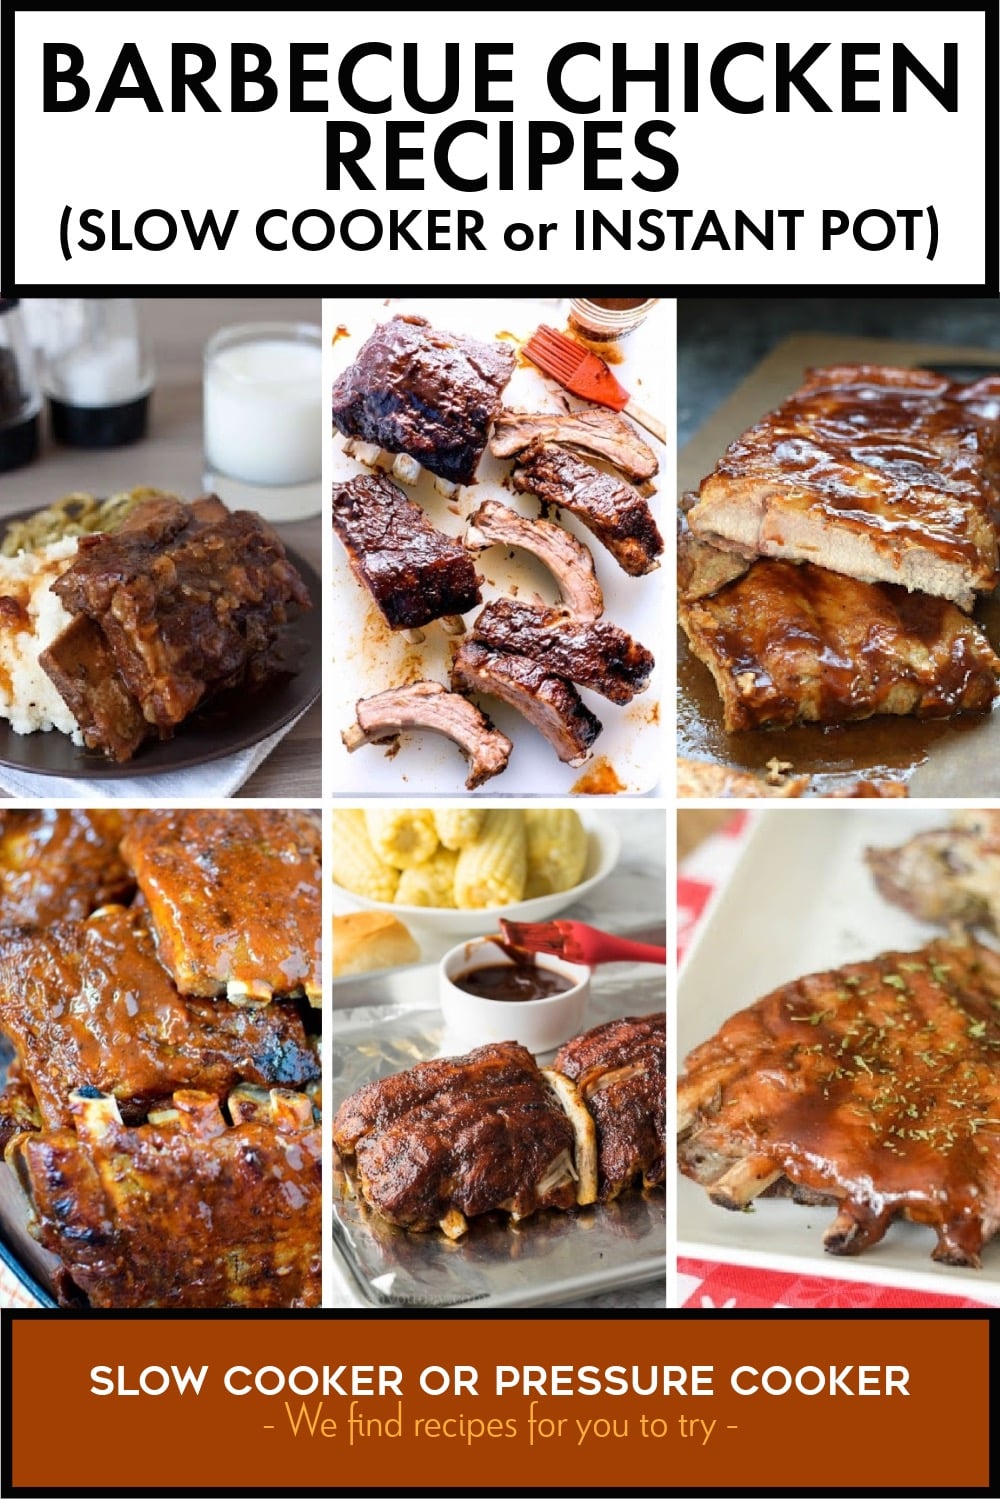 Pinterest image of Barbecue Chicken Recipes (Slow Cooker or Instant Pot)